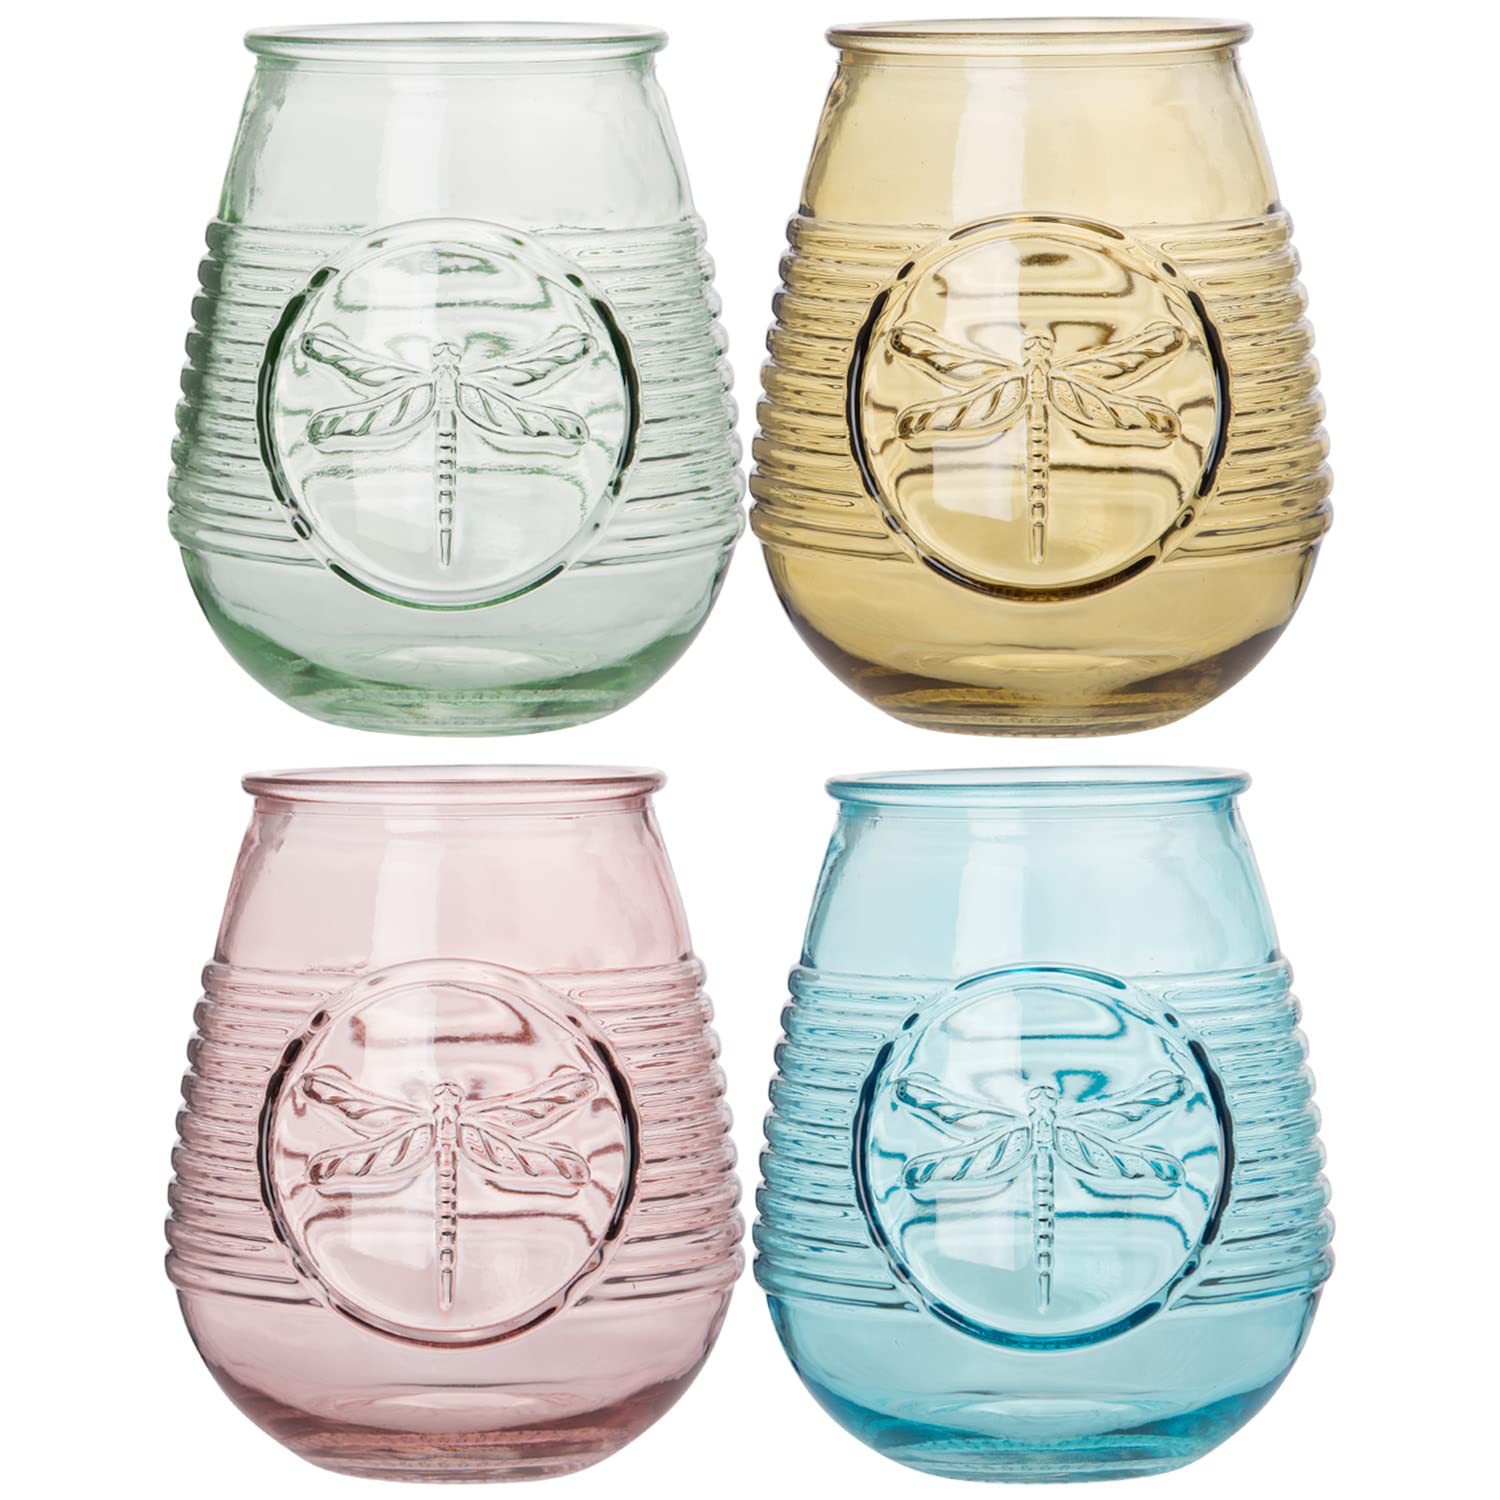 Glaver's Set Of 4 21 Oz. Colored Glasses, Multicolor Embossed Dragonfly Wine Glasses, Vintage Drinking Glasses, Tumblers For All You Favorite Cocktails And Beverages, Handwash Only